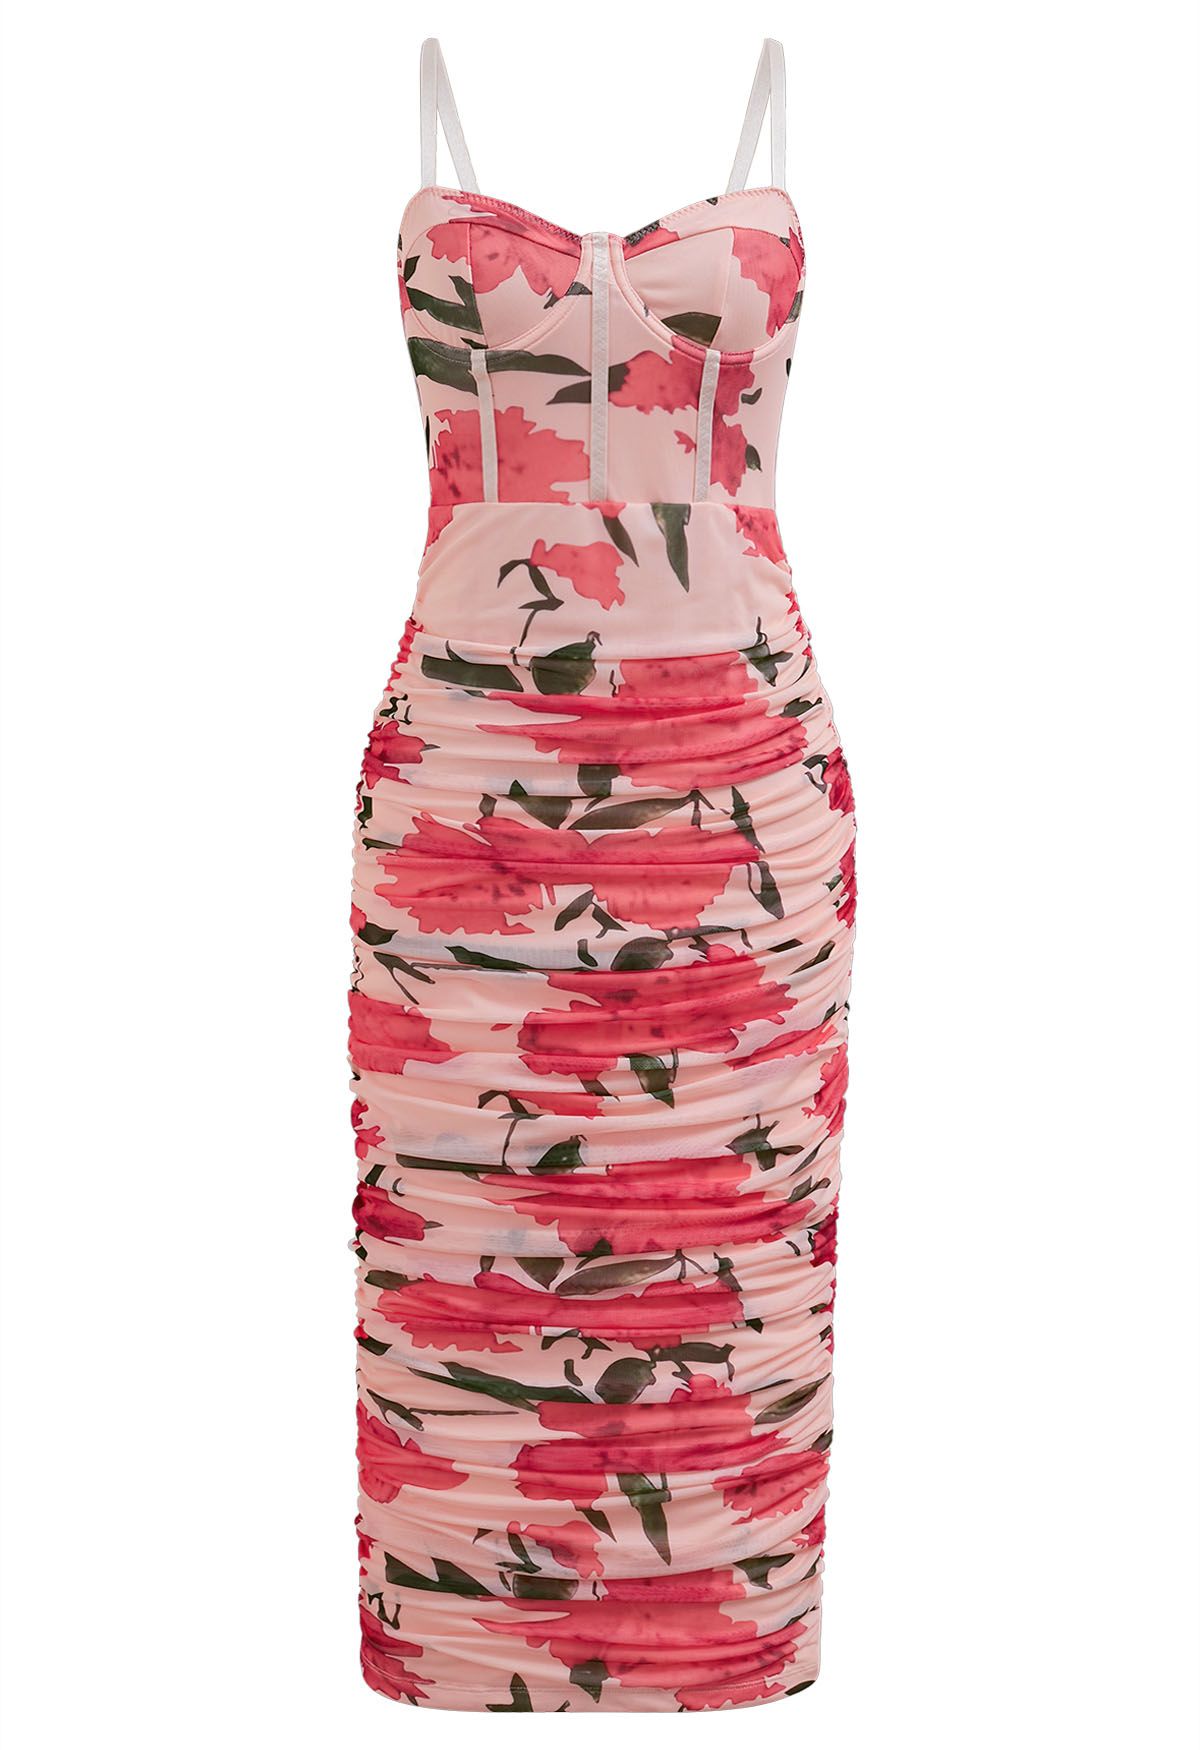 Pink Floral Ruched Mesh Cami Dress - Retro, Indie and Unique Fashion